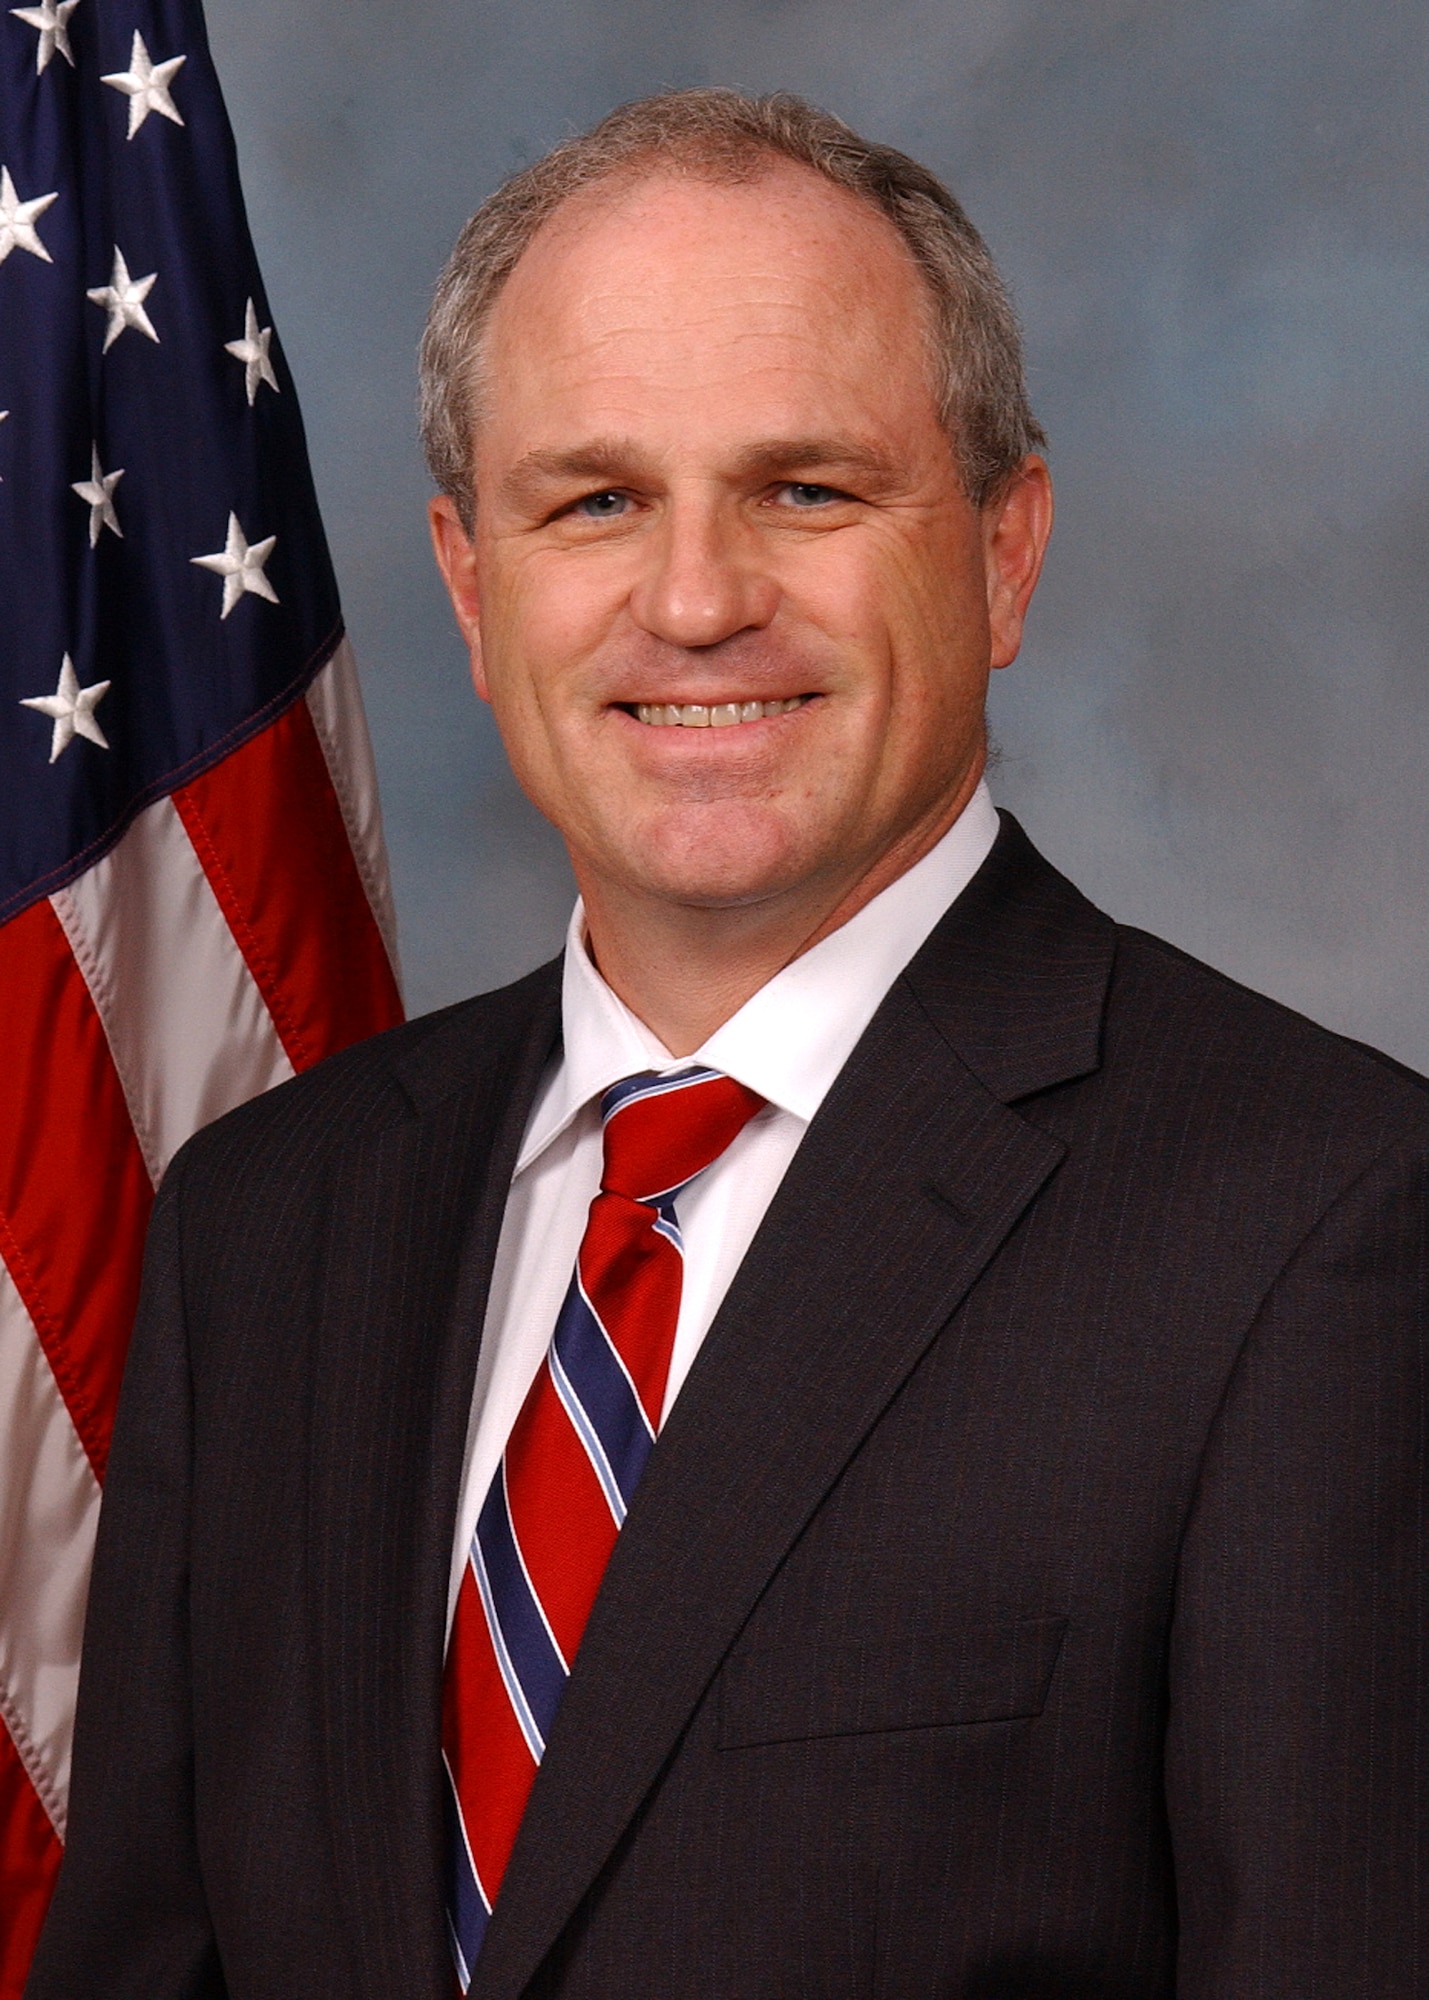 Dr. Gregory Spanjers, chief scientist for Air Force Research Laboratory's Space Vehicles Directorate, was honored with the 2015 Presidential Rank Award. The awards are given annually to a small number of senior federal government executives and professionals for extraordinary service, and are decided on by the President of the United States. (Courtesy photo)